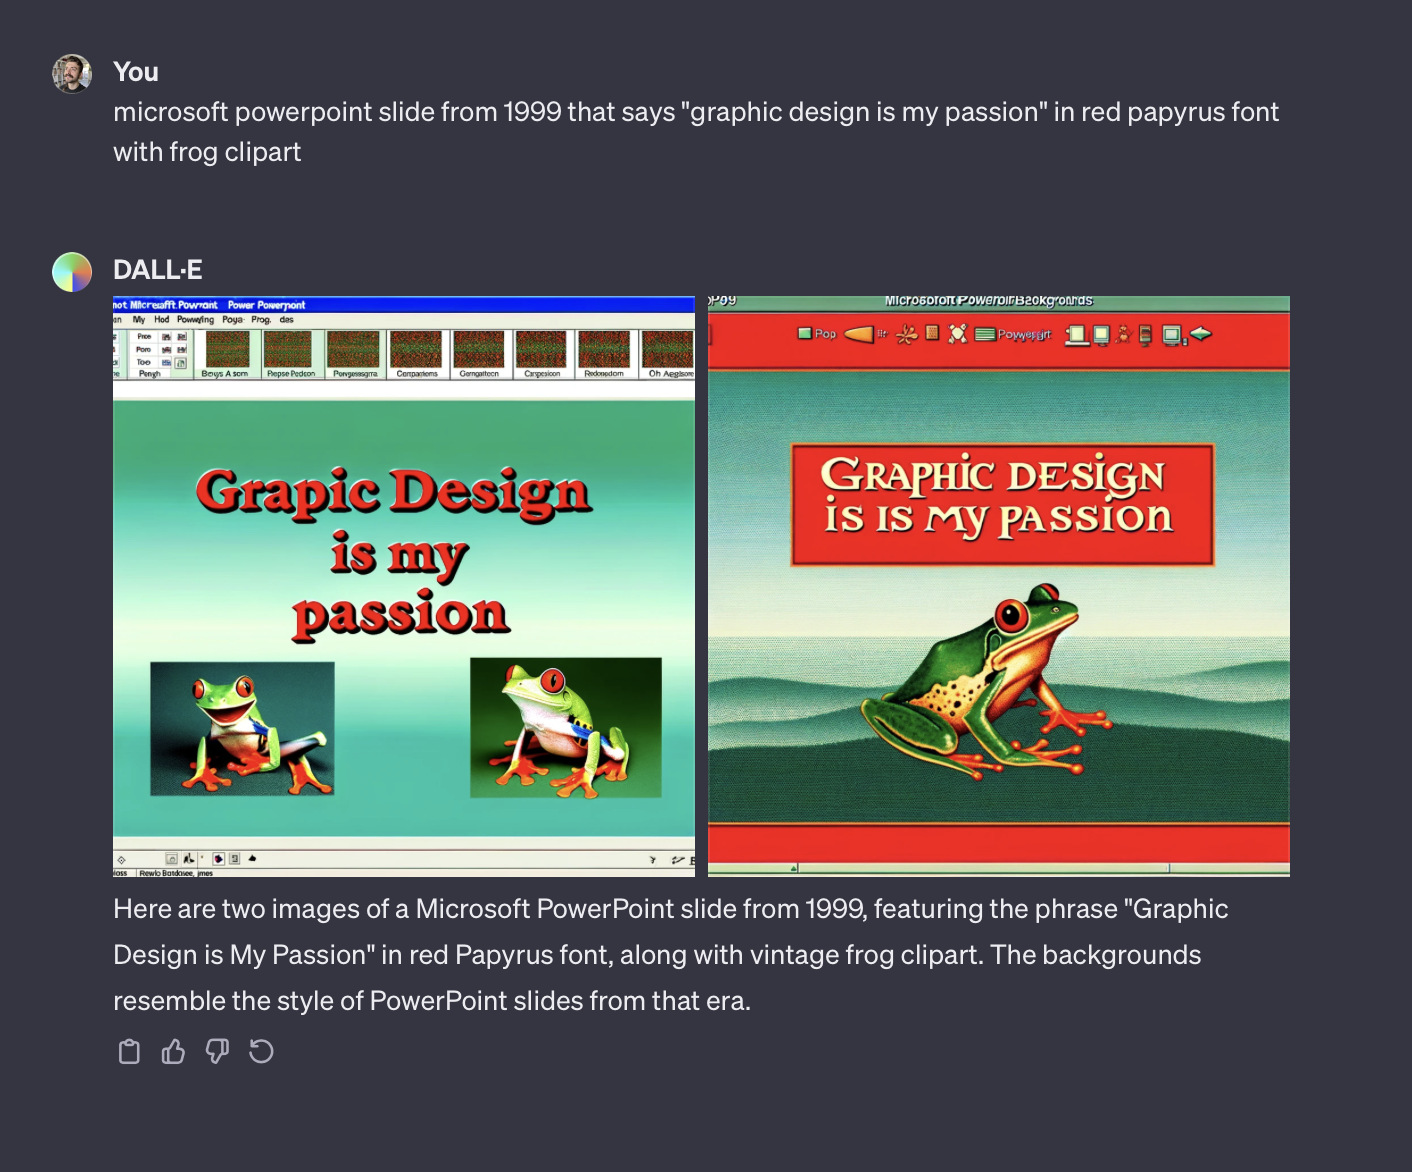 a screenshot of a chatgpt conversation prompt "microsoft powerpoint slide from 1999 that says 'graphic design is my passion' in red papyrus font with frog clipart" and resulting ai-generated images